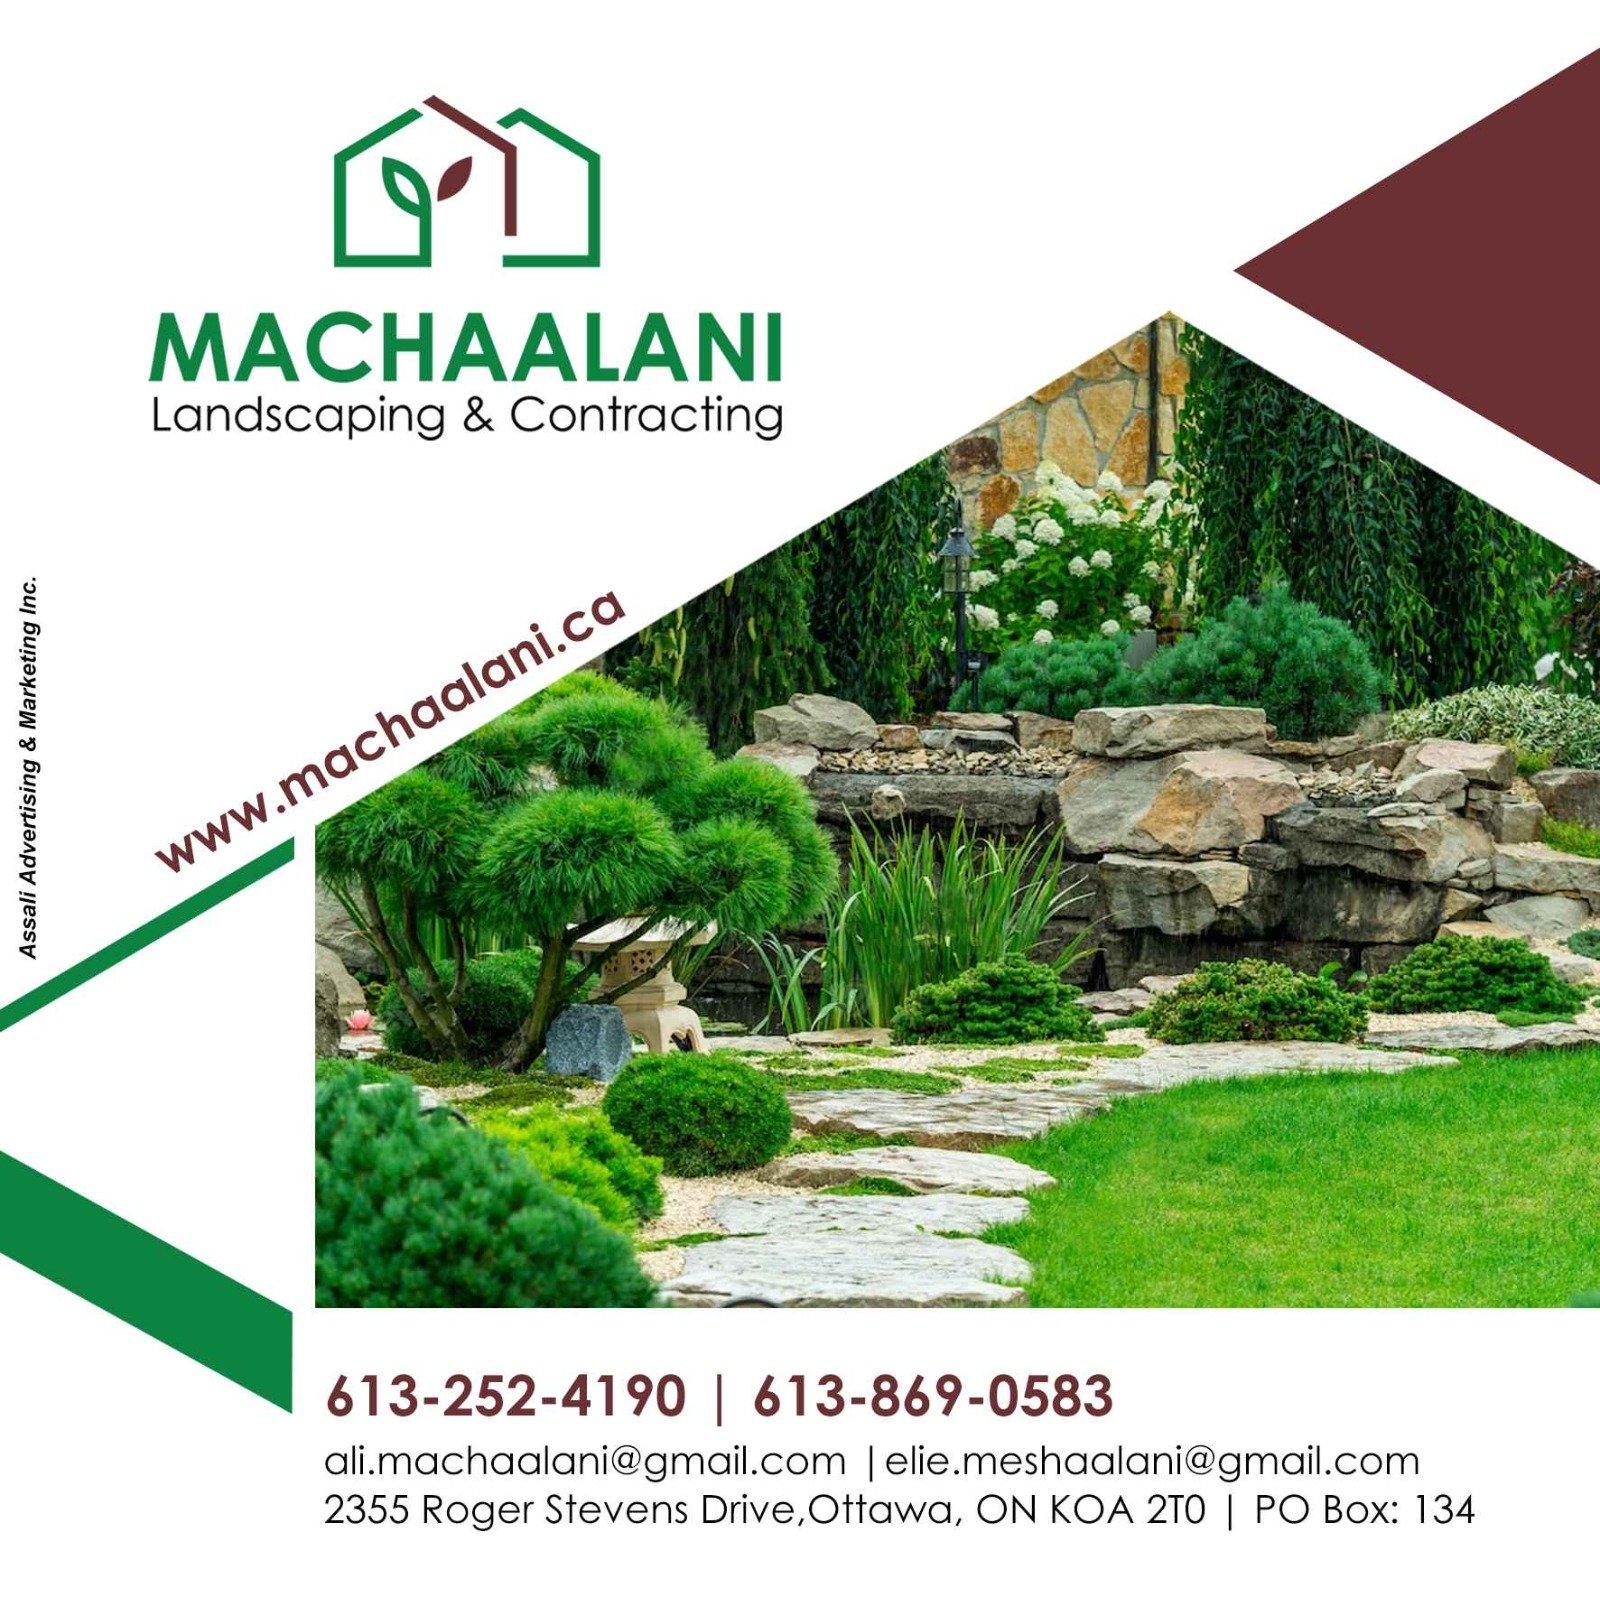 Machaalani Landscaping and Contracting